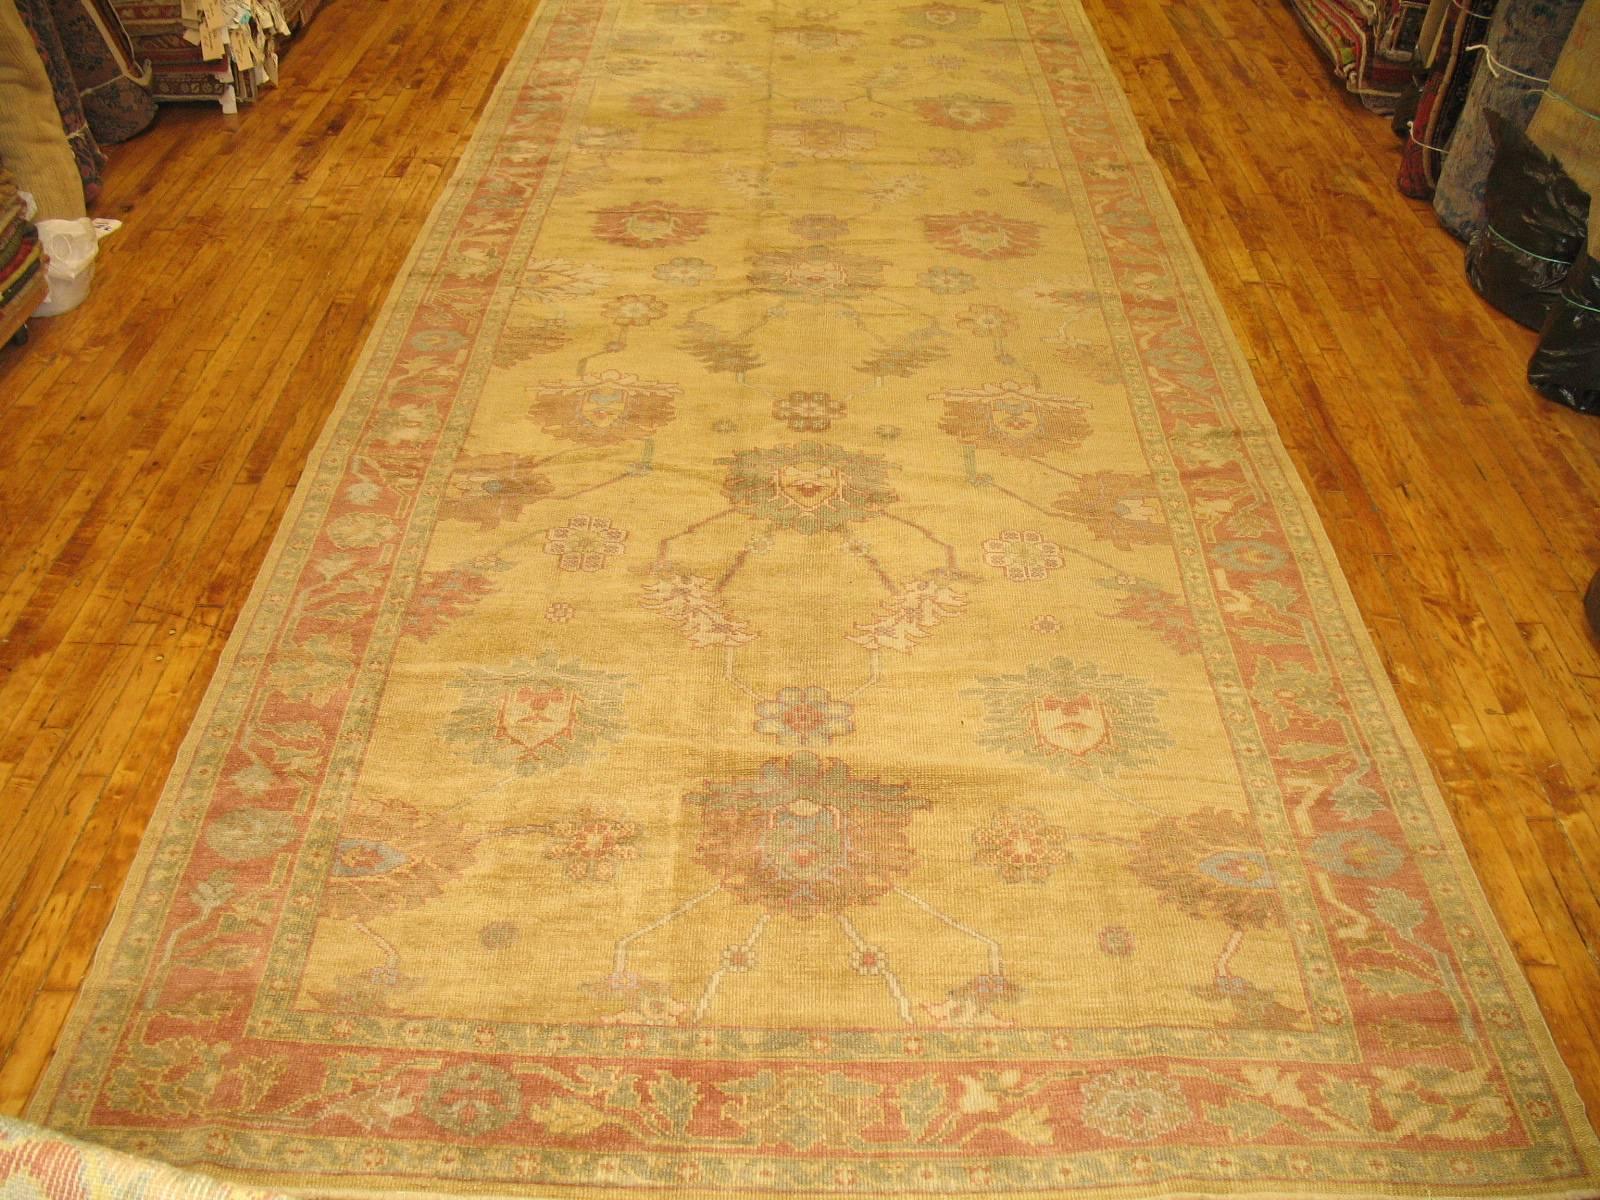 A hand-knotted One of a kind long gallery size Oushak rug designed by co-owner Ilan Zabihi that’s been re-created in our workshop in Turkey using luscious wool derived from early 20th century Oushaks. Colors are executed perfectly on this piece